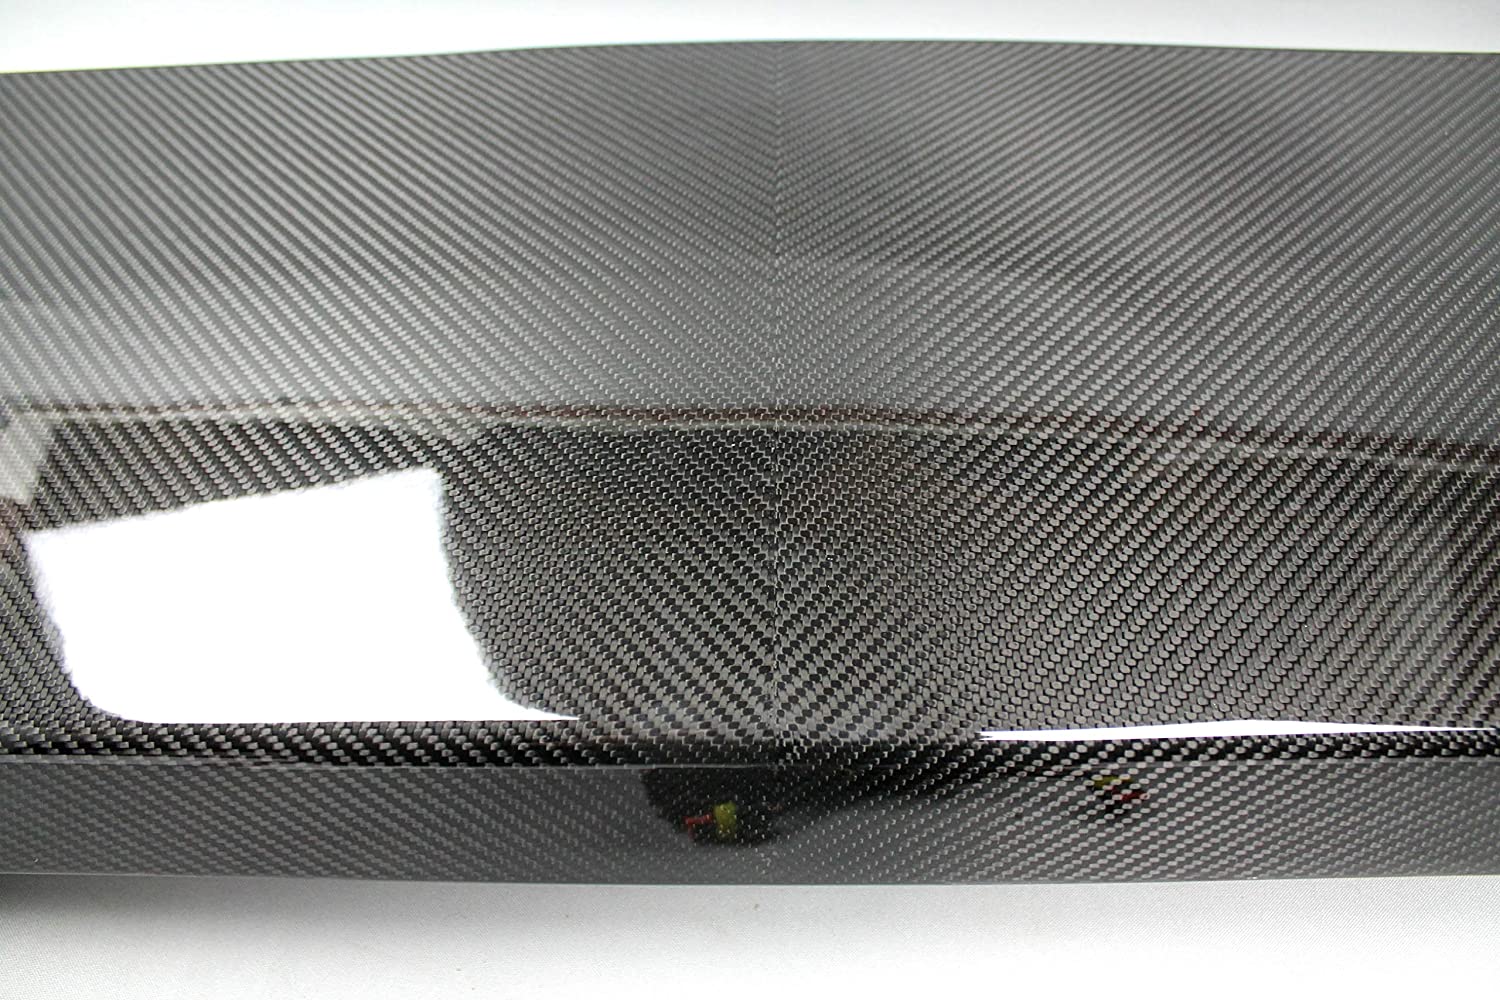 6x6 4x4 Squared Brabus Front Roof Carbon Spoiler with LEDs for Mercedes W463 G Wagon